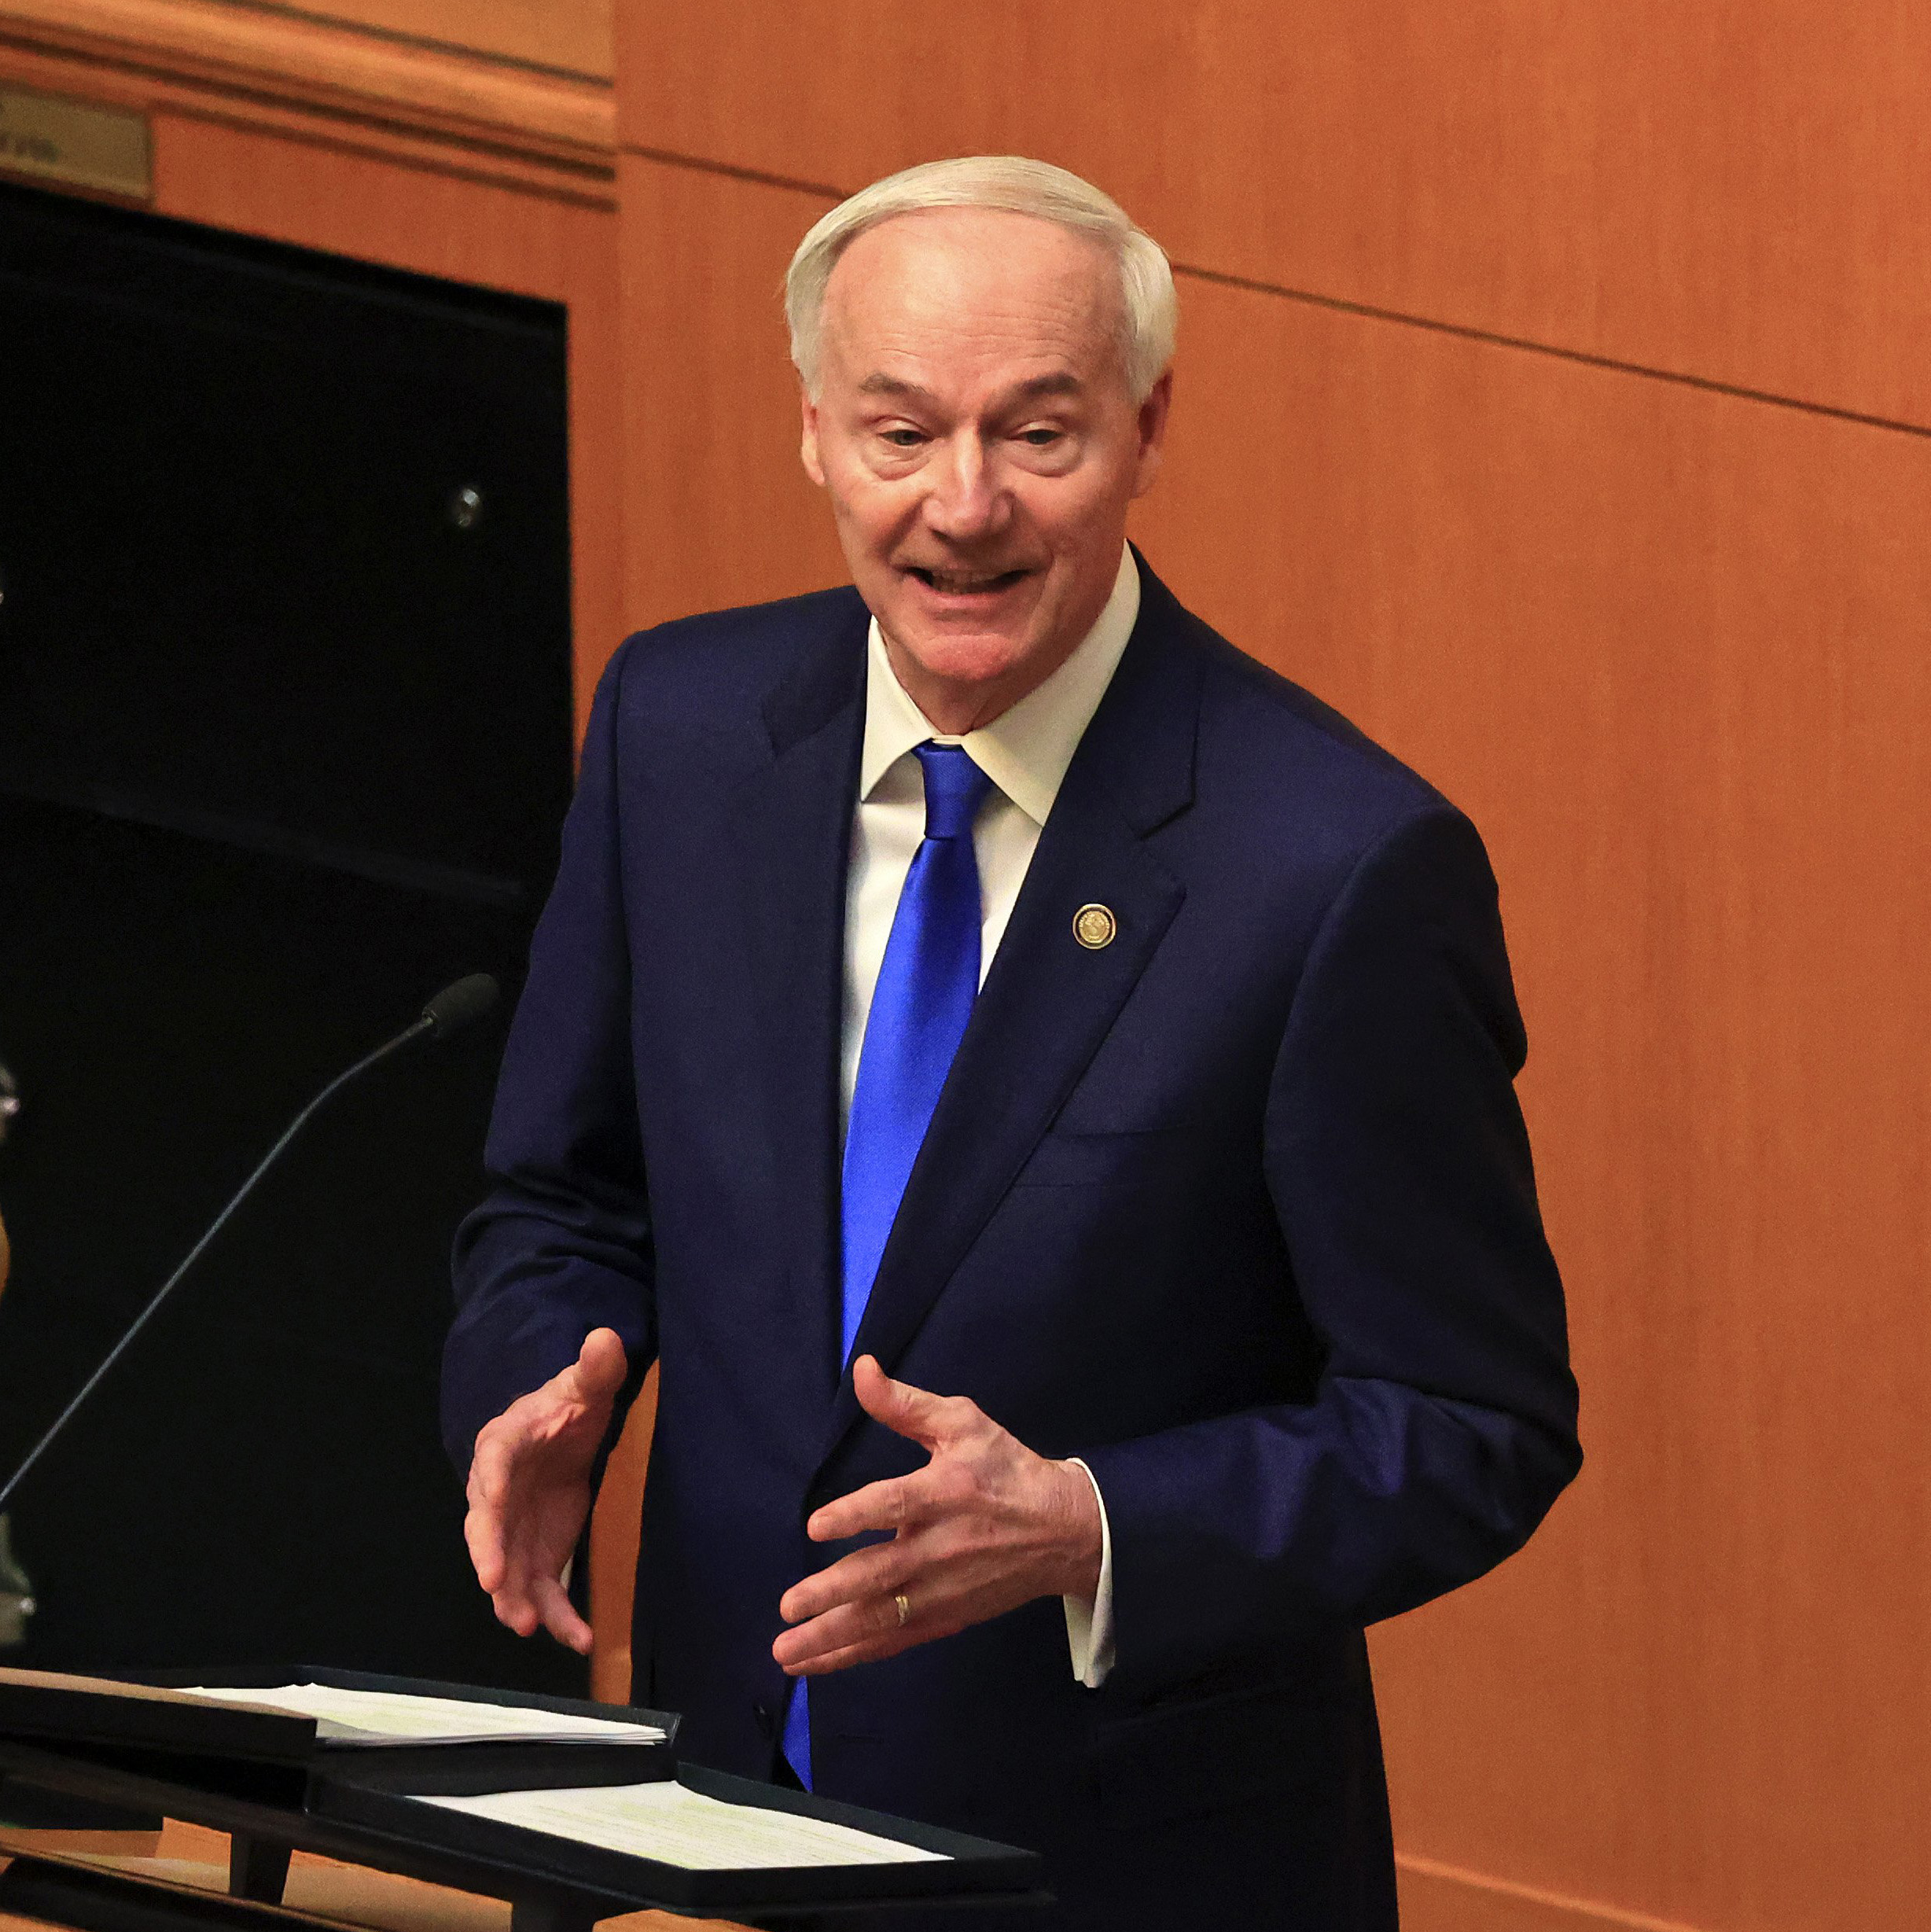 Gov. Asa Hutchinson on his final months in office